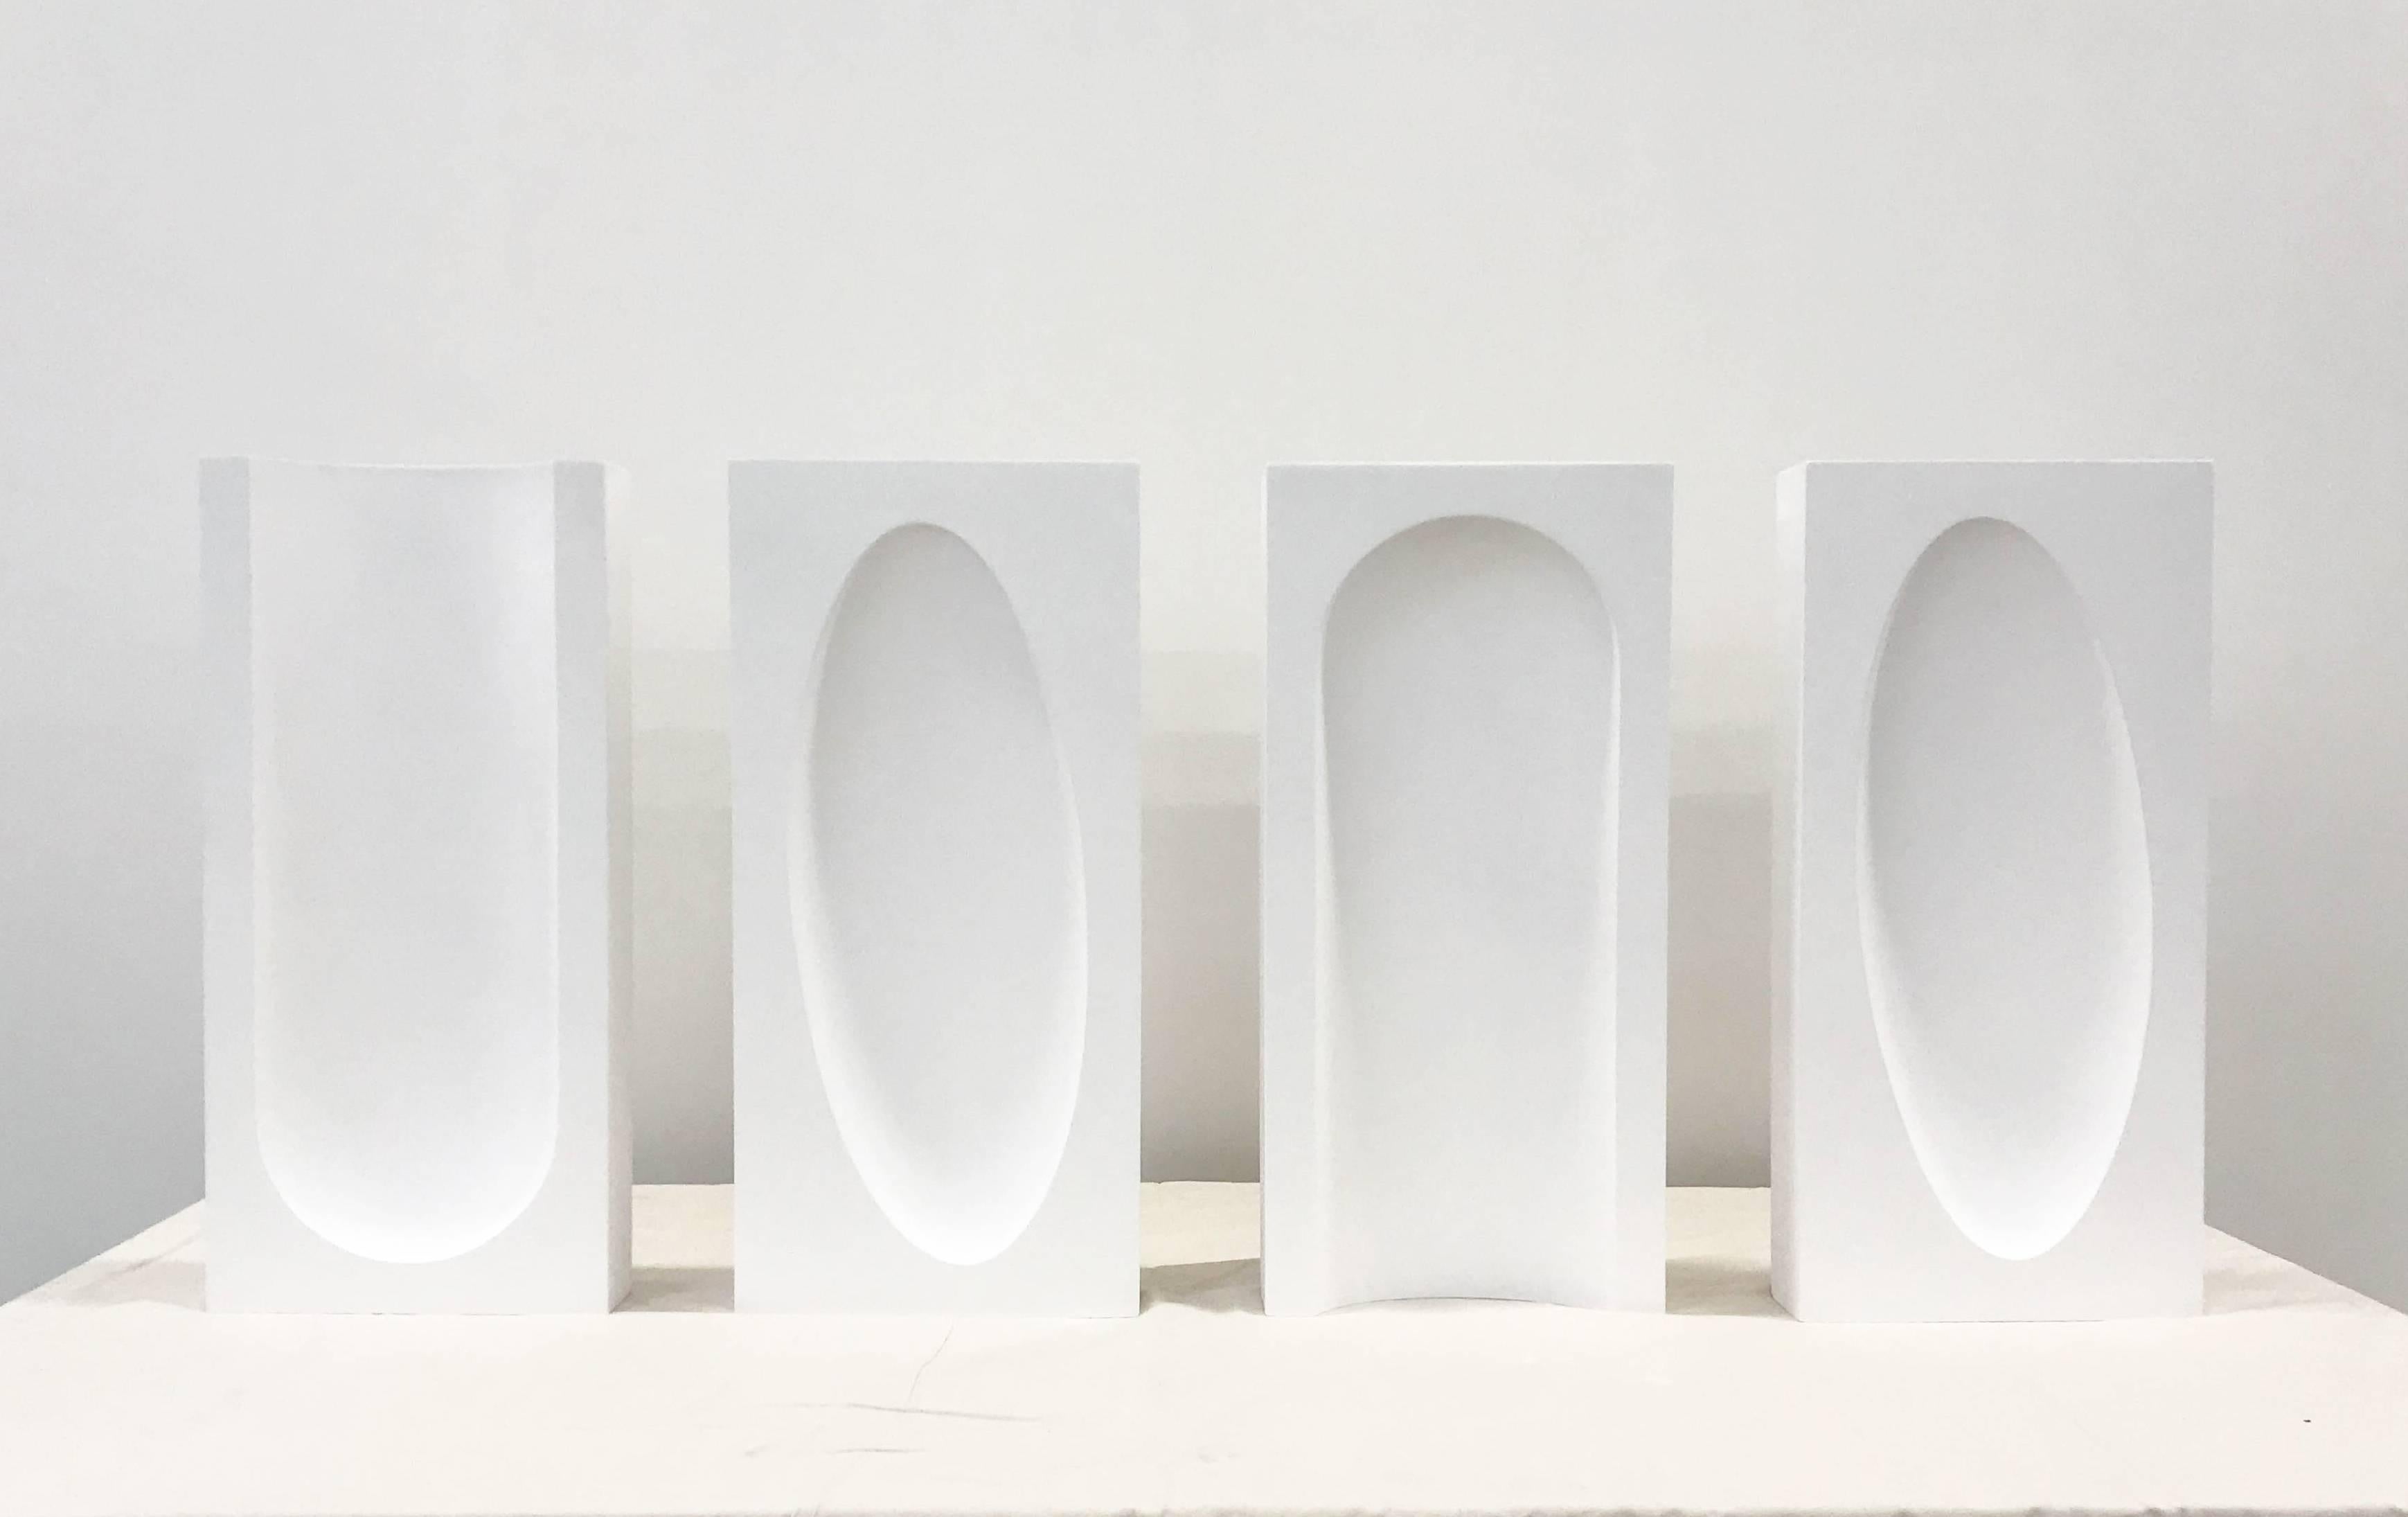 Exploration of Minimalist shapes quietly referencing Brutalist architecture. Cast by hand using unpigmented plaster, shapes can be grouped together or purchased as one striking, bold statement. 

Sculptures can be placed as art accessories on